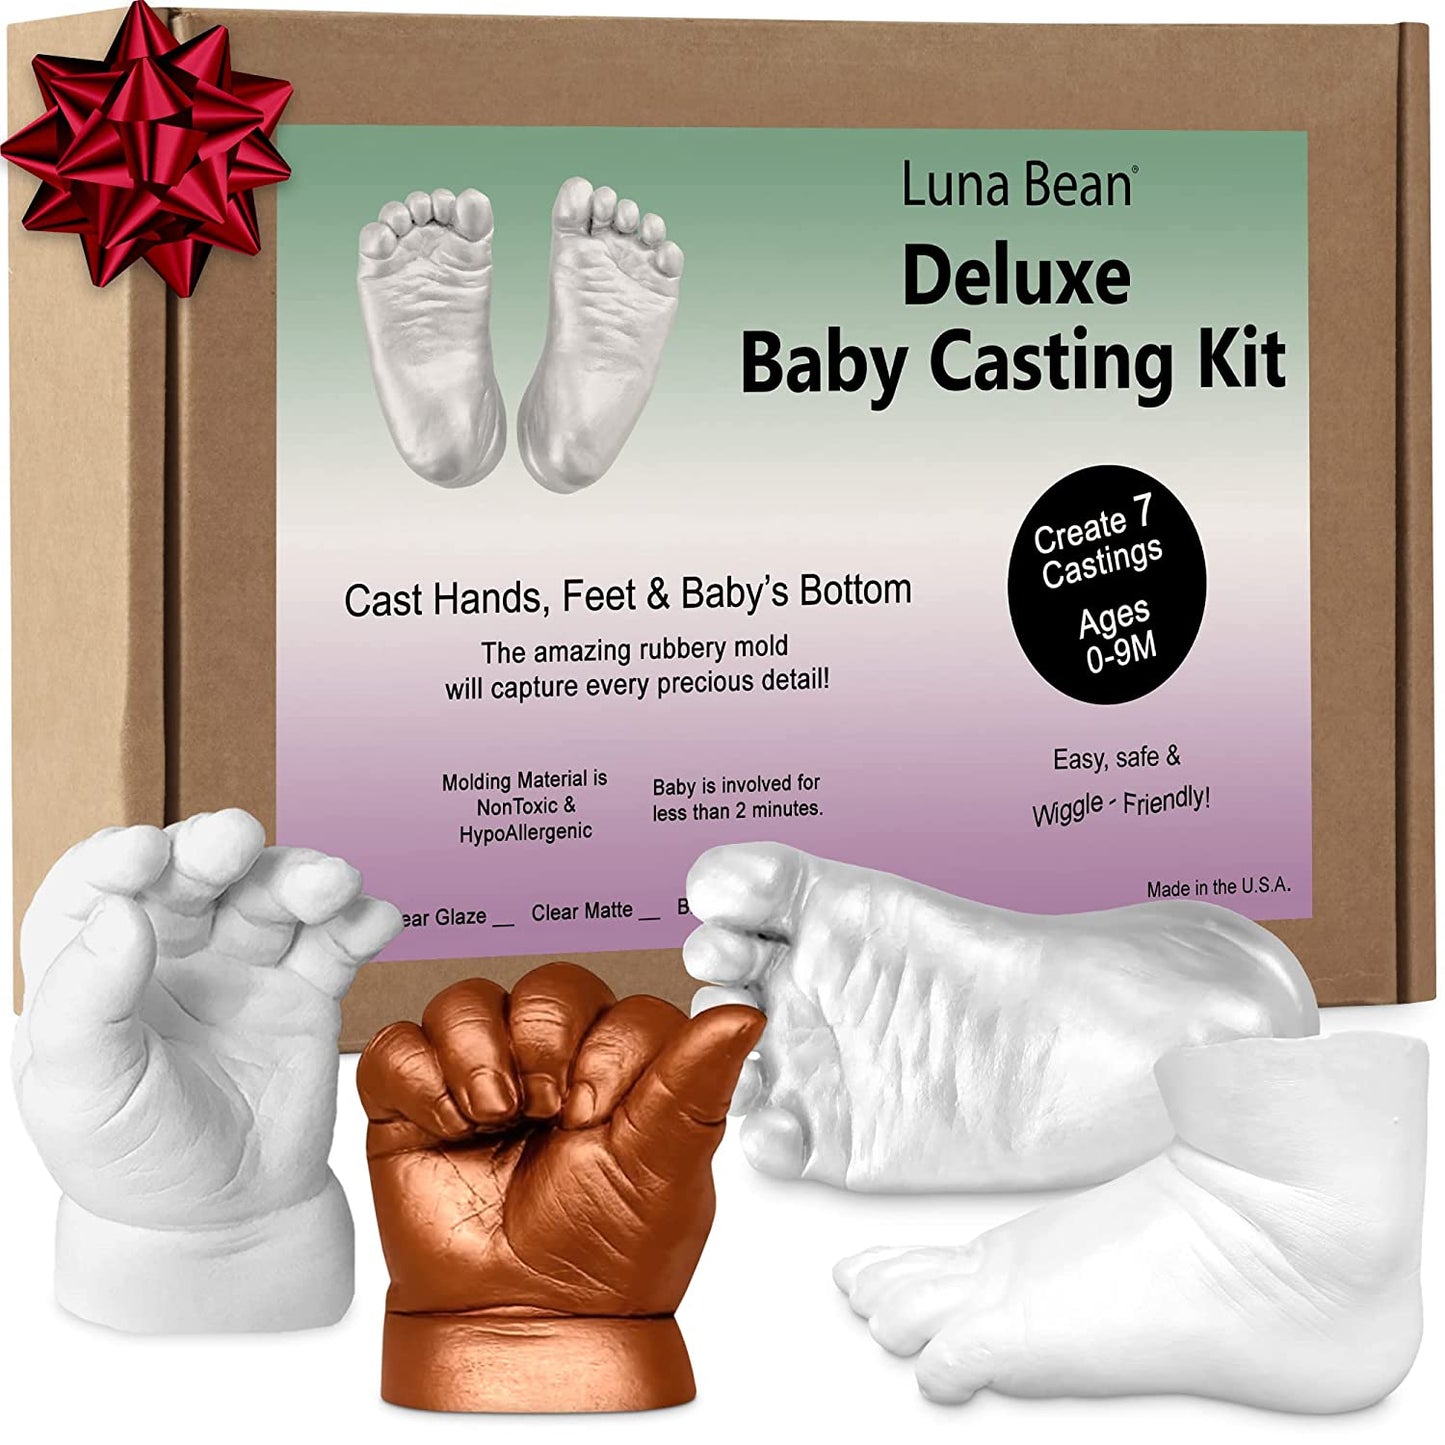 Luna Bean Deluxe Baby Keepsake Hand Casting Kit - Plaster Hand Mold Casting Kit for Infant Hand & Foot Mold - Baby Casting Kit for First Birthday, Christmas & Newborn Gifts - (Pearl Sealant) - (For 6 piece(s))